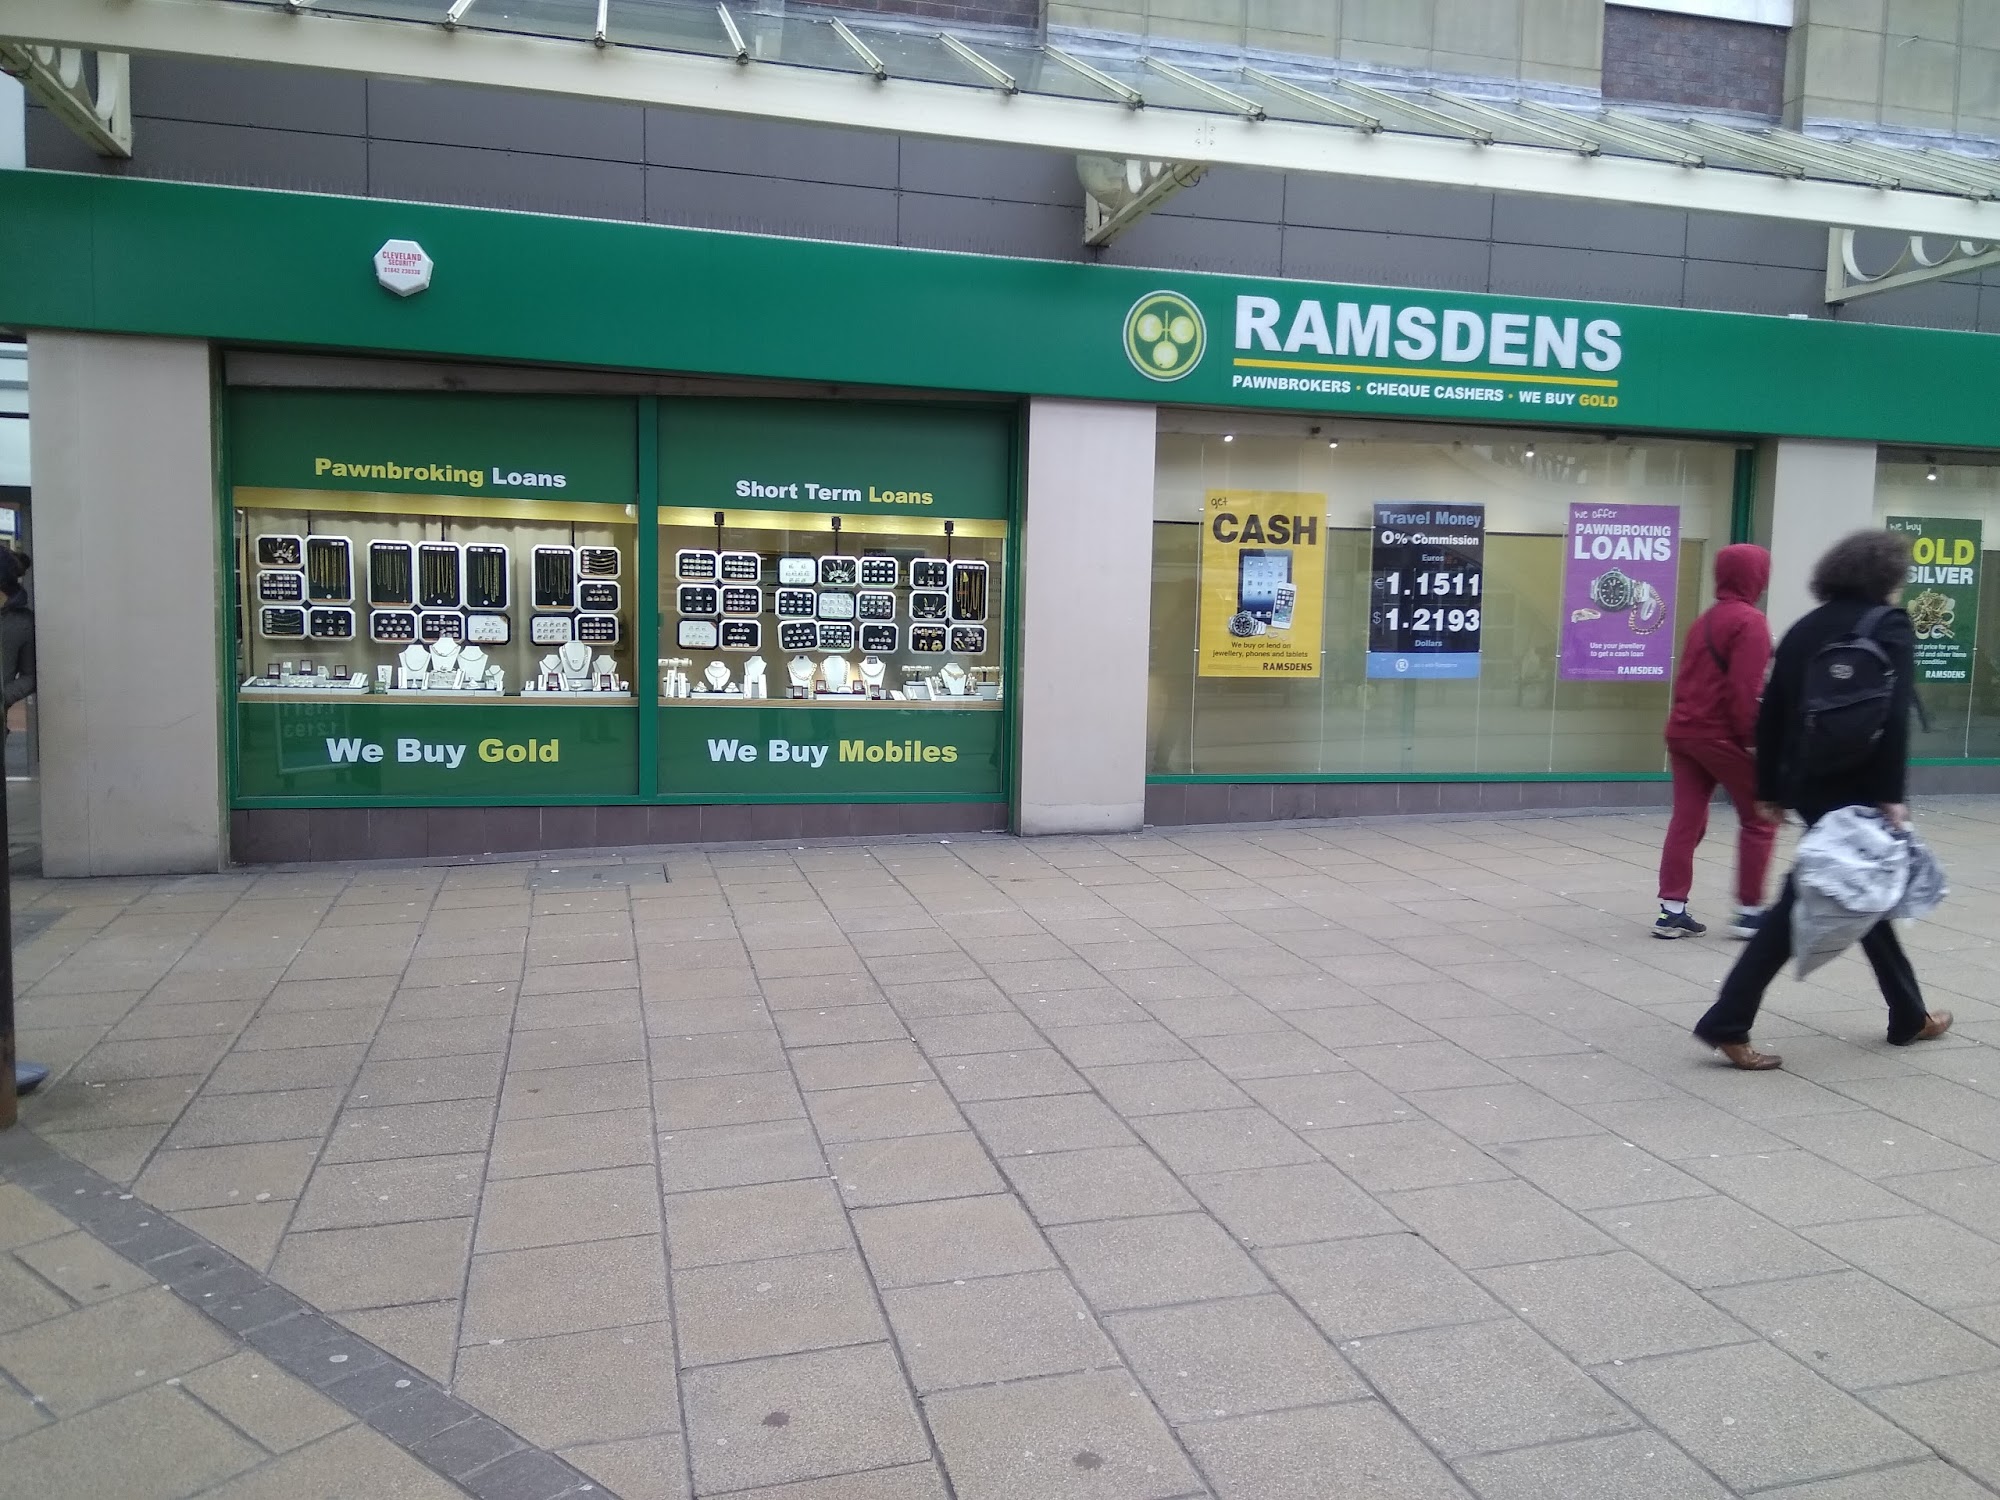 Ramsdens - The Airedale Shopping Centre - Keighley